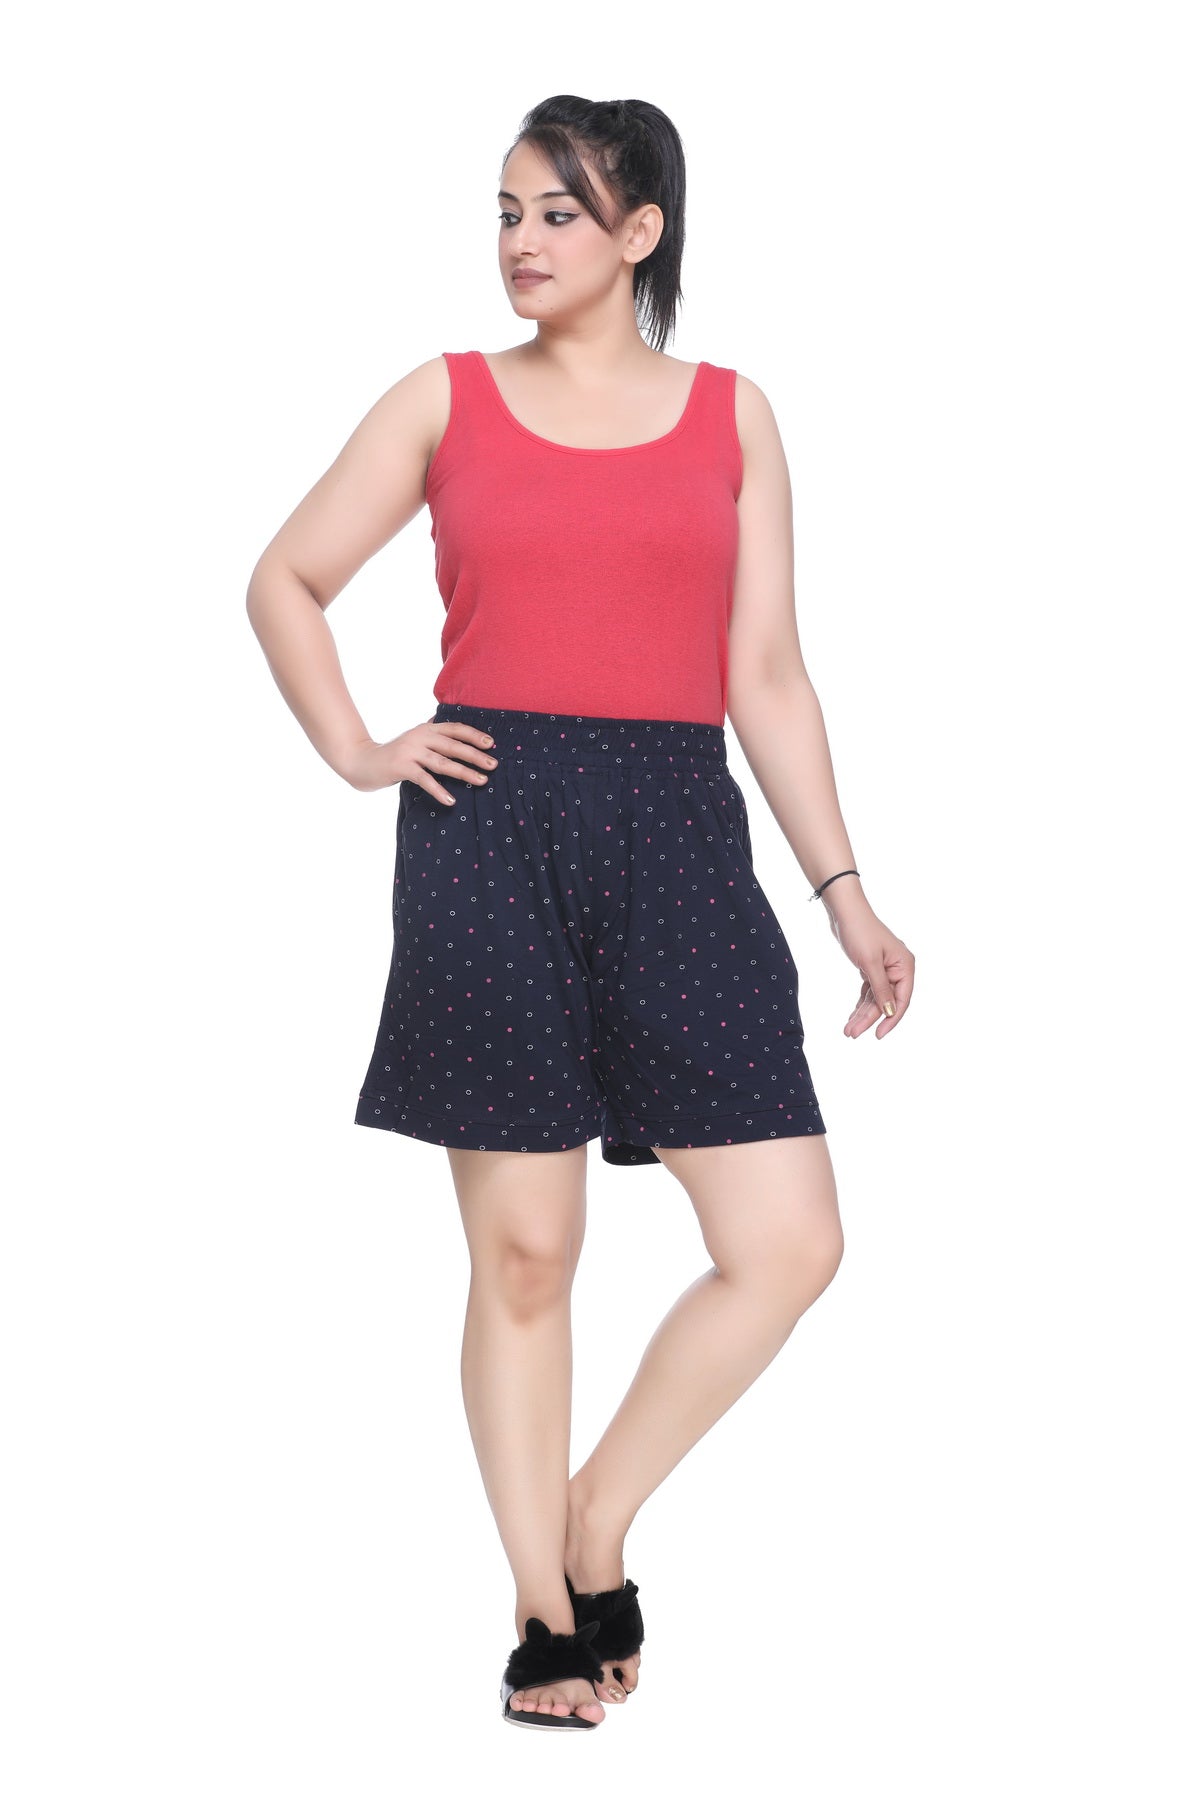 CUPID Plus Size Printed Cotton Shorts For Women Combo Pack of Two ( Coral Red/ Navy) freeshipping - Cupid Clothings